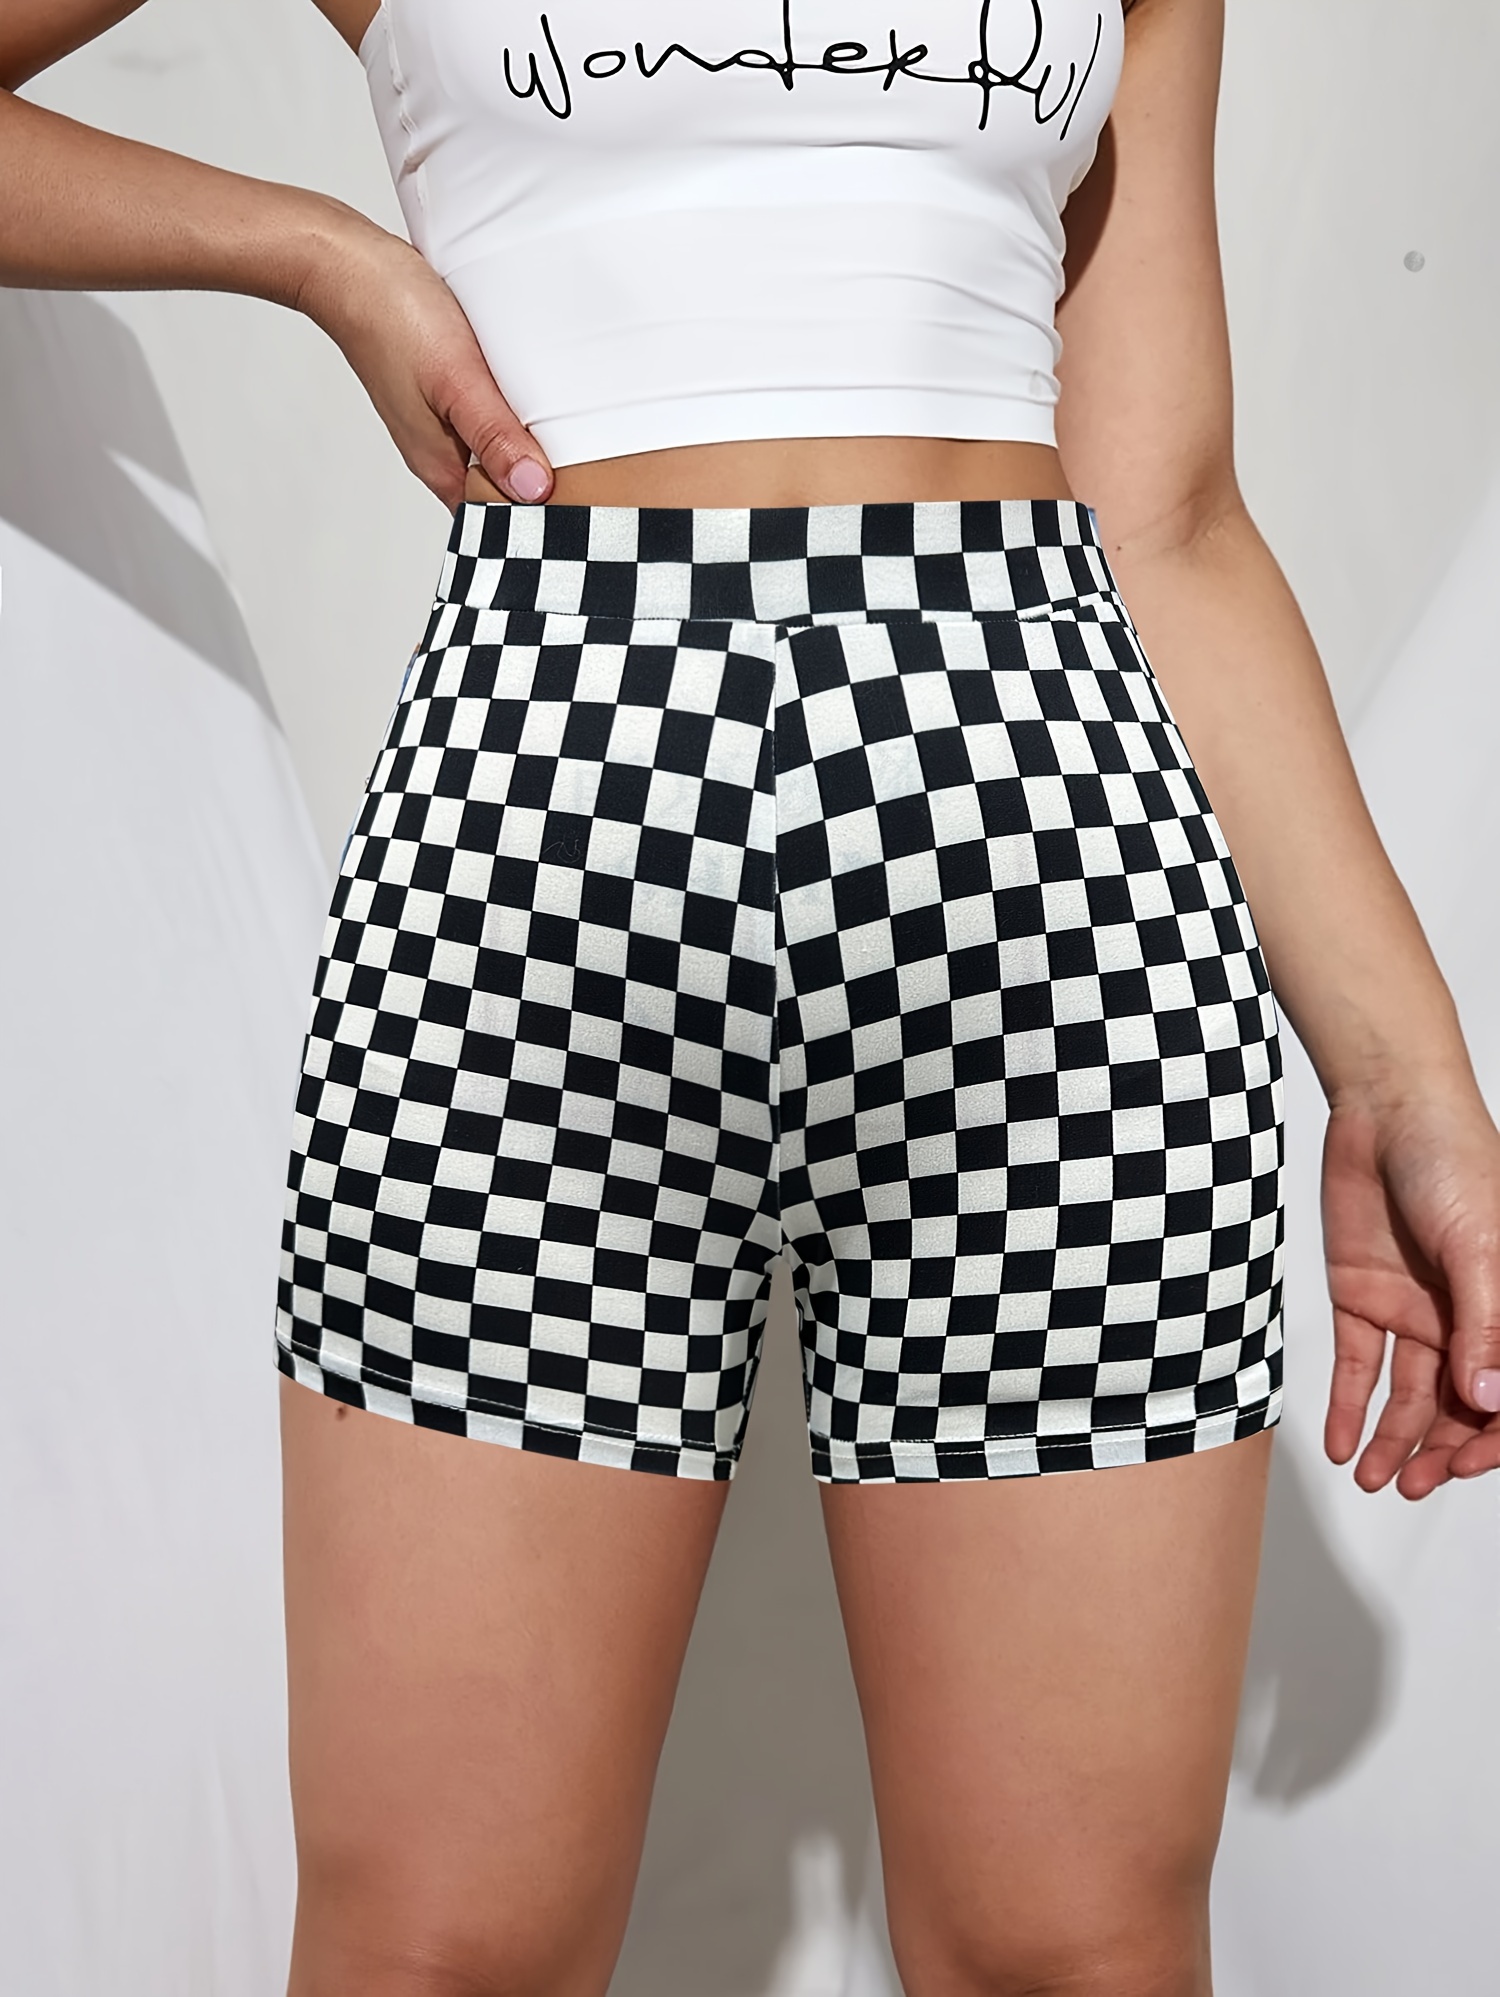 Angelsoft Graphic Print Shorts, Sexy Slim Summer Booty Shorts, Women's  Clothing